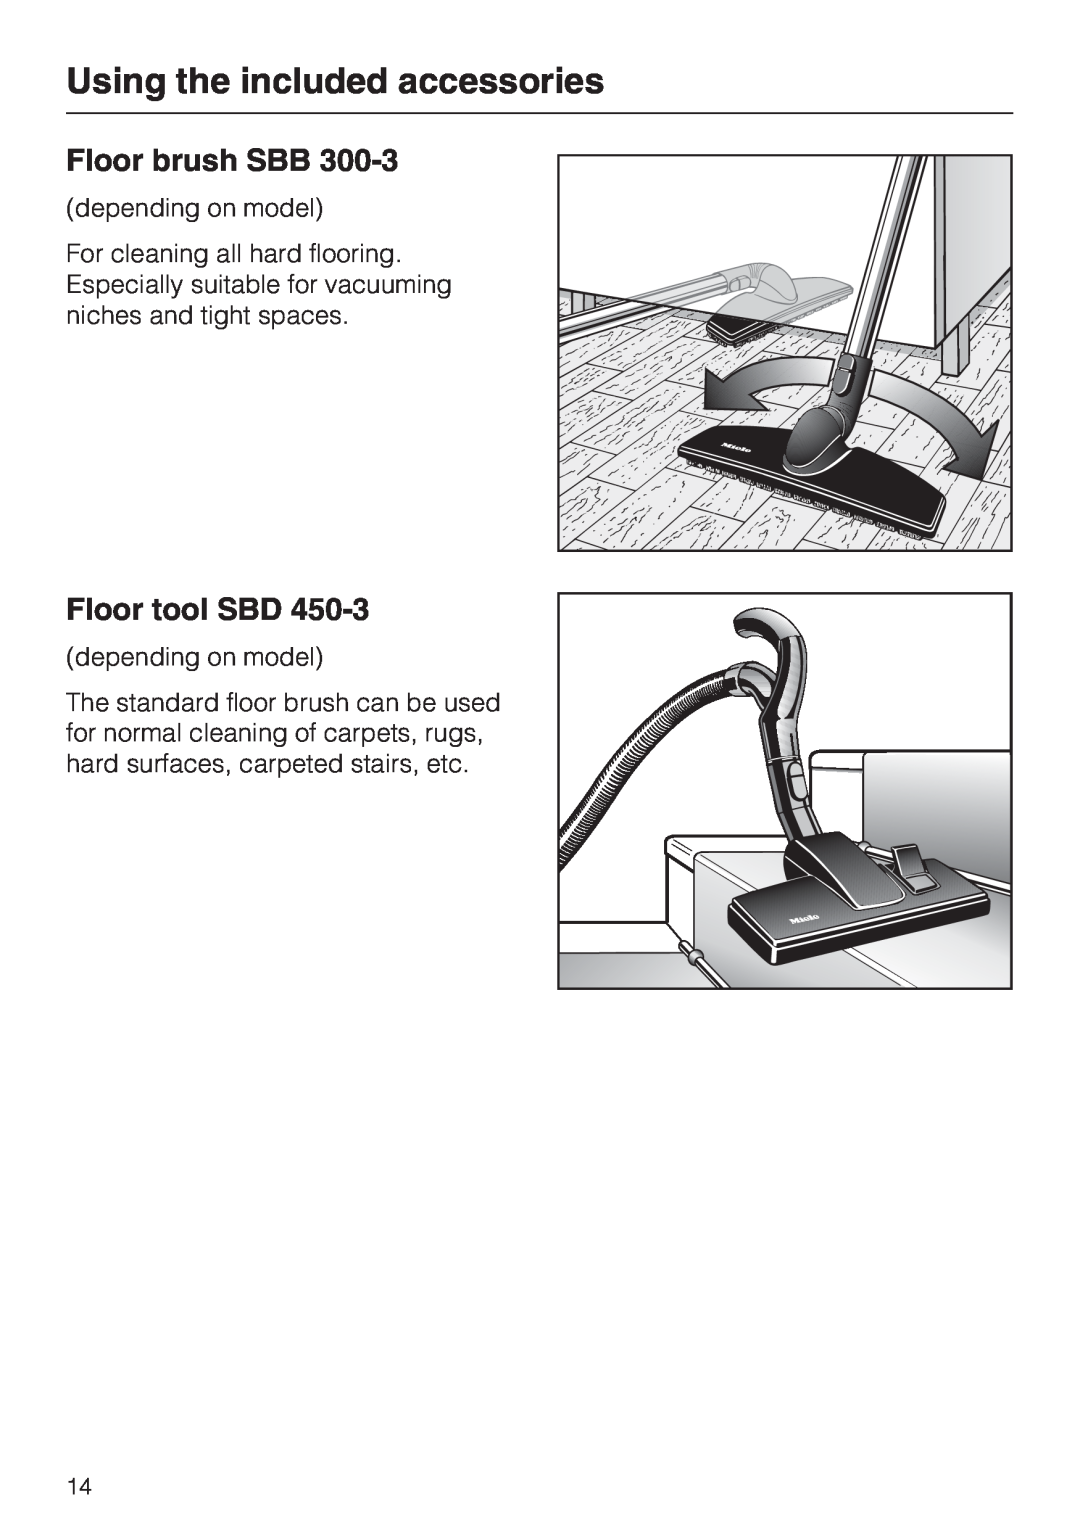 Miele S 4002 manual Using the included accessories, Floor brush SBB, Floor tool SBD, depending on model 